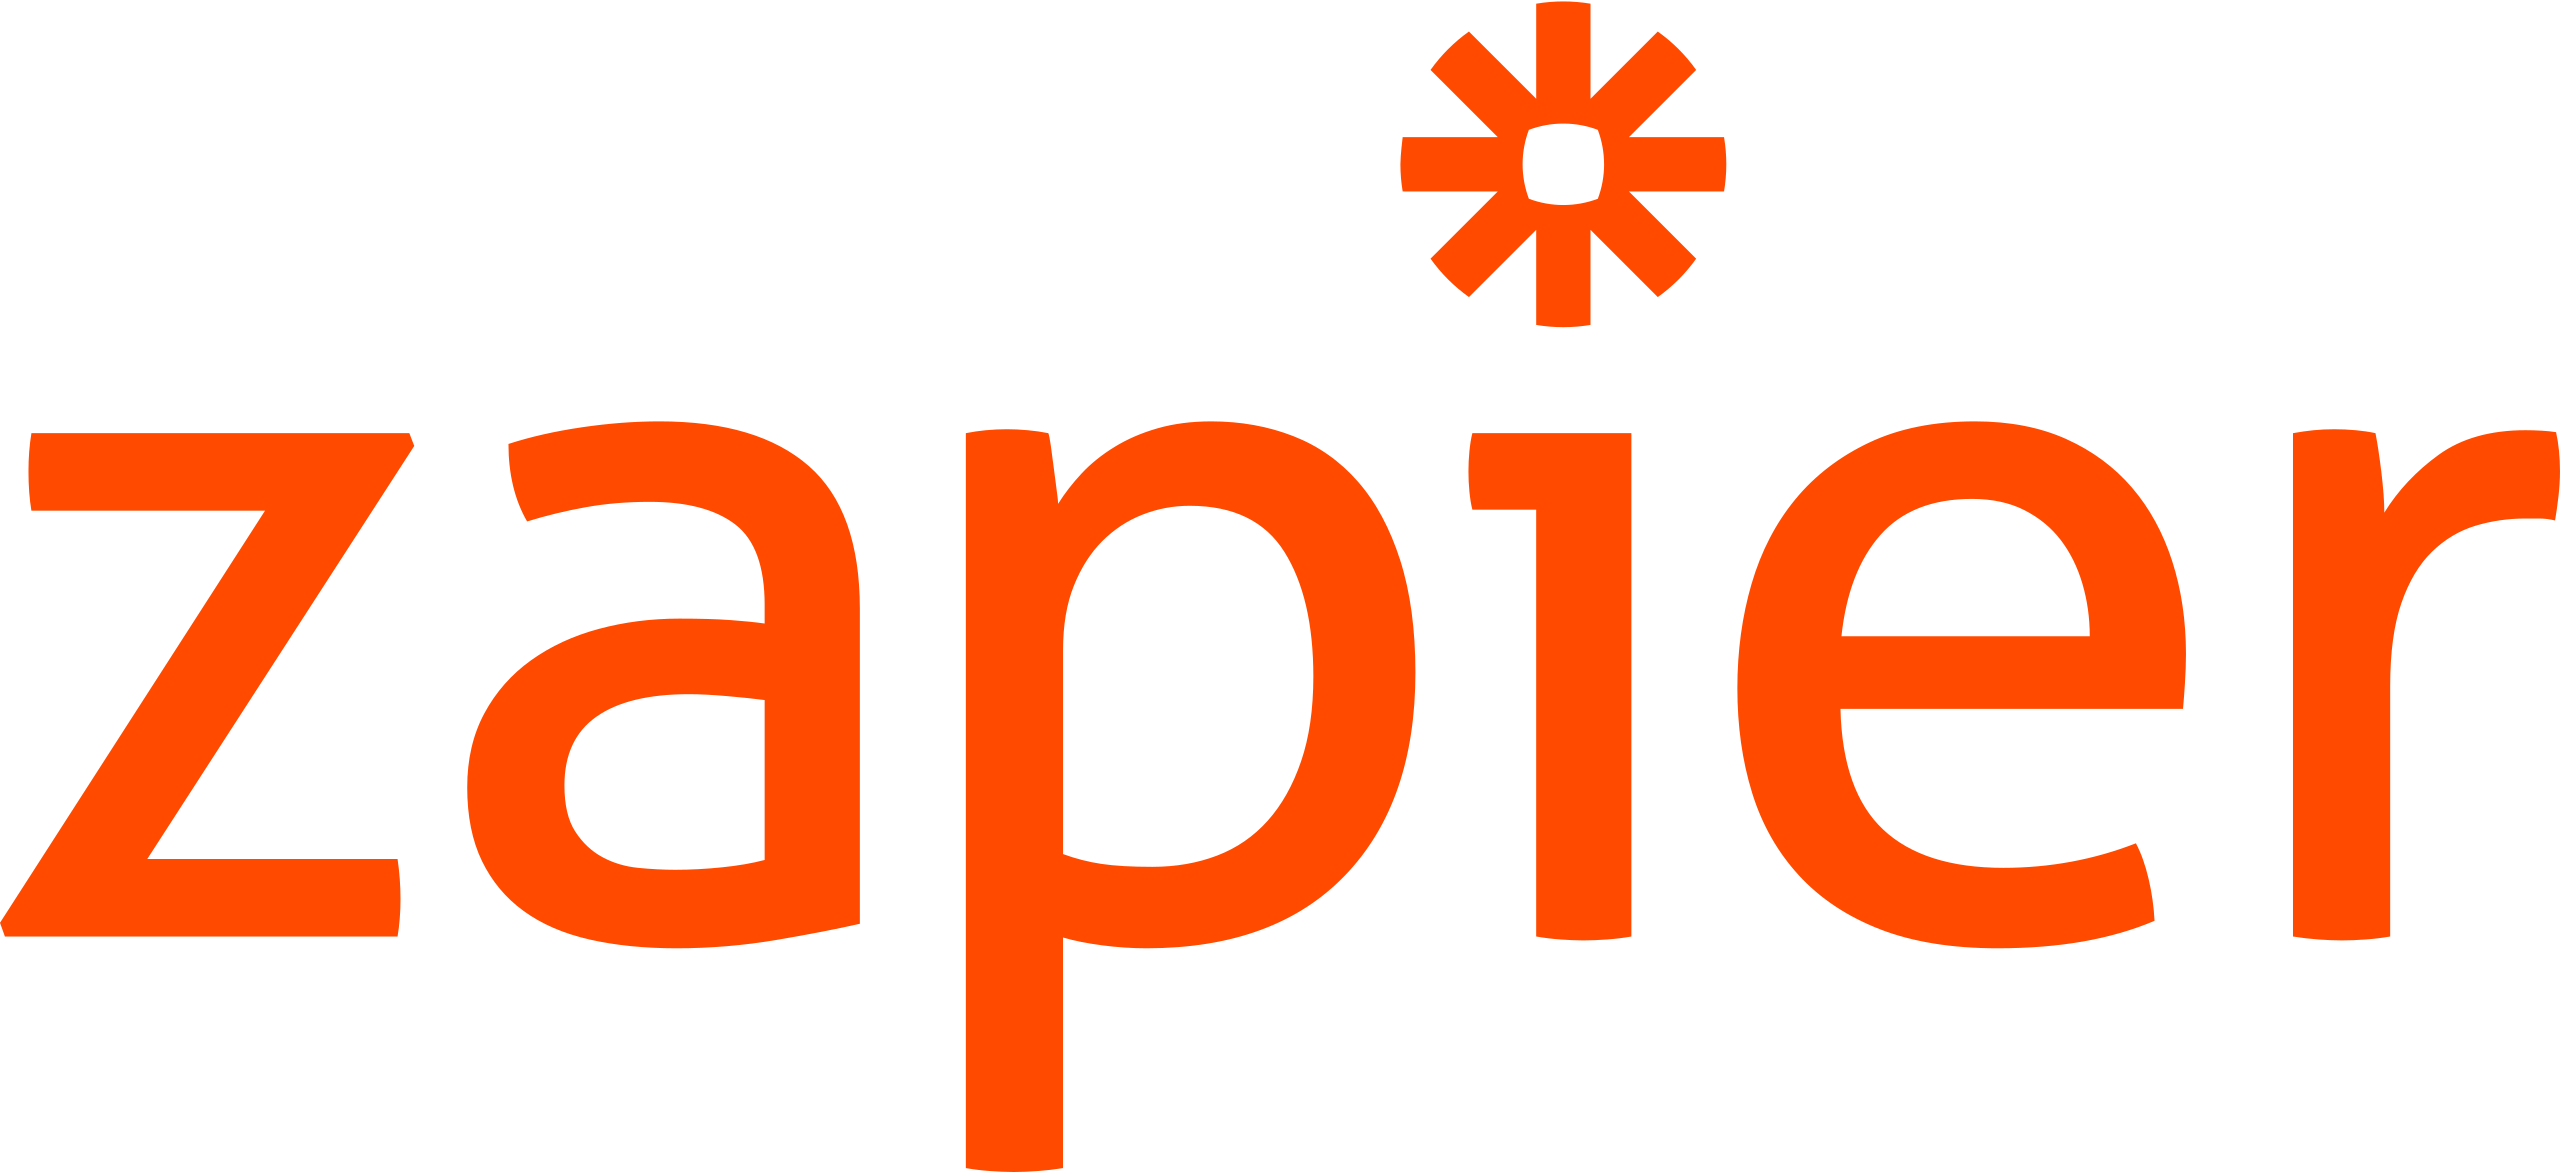 Zapier allows for many integrations